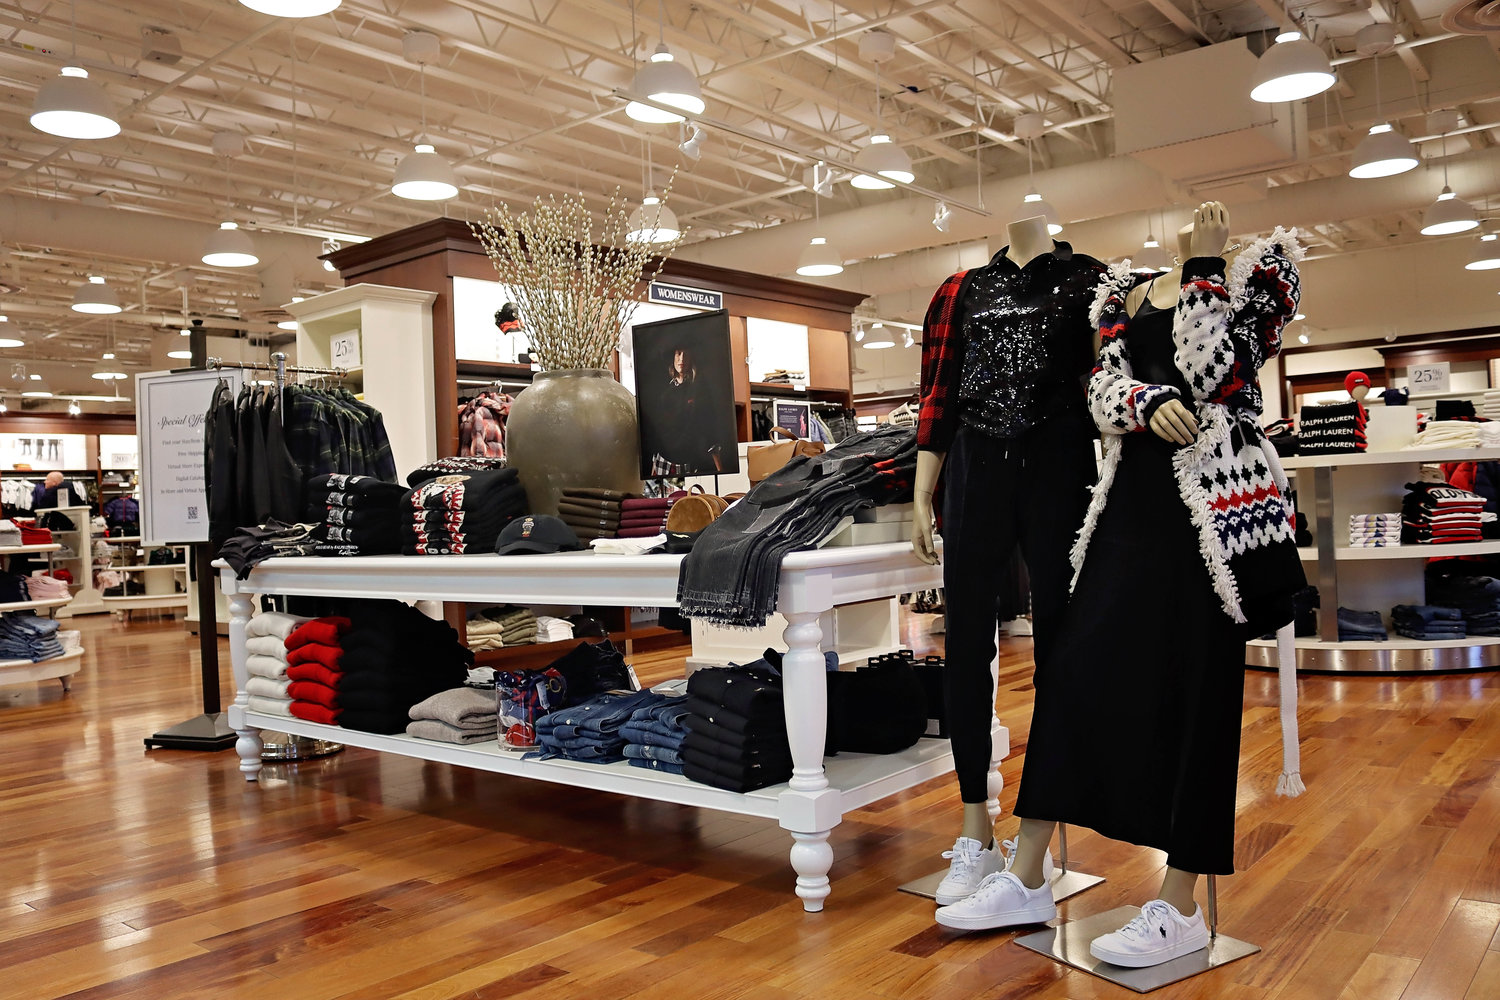 Chamber to Celebrate 15 Years of Polo Ralph Lauren Factory Store at  Centralia Outlets